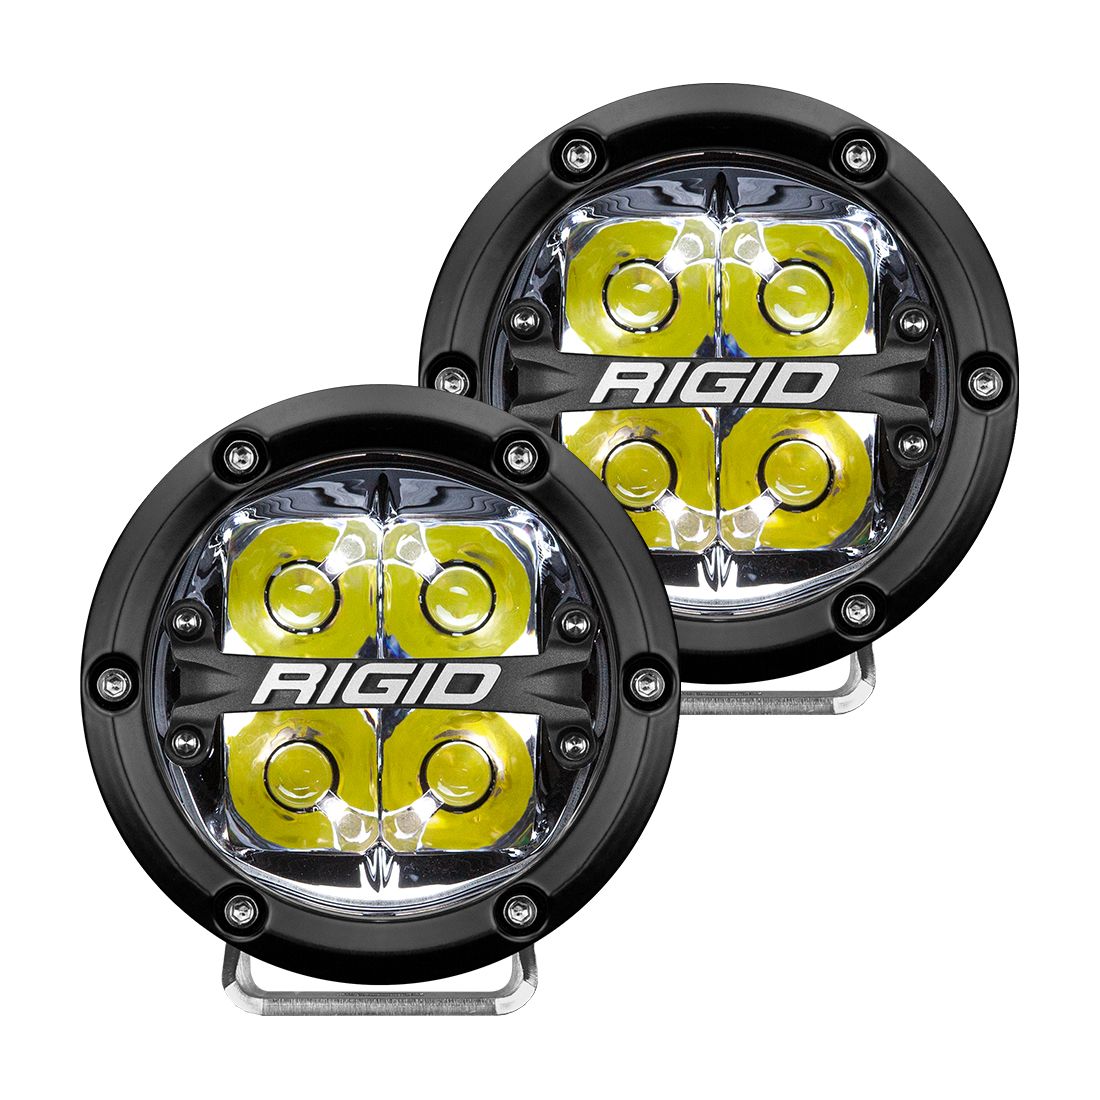 Rigid 36113 360-Series 4 Inch LED Off-Road Spot Optic with White Backlight Pair - BumperStock